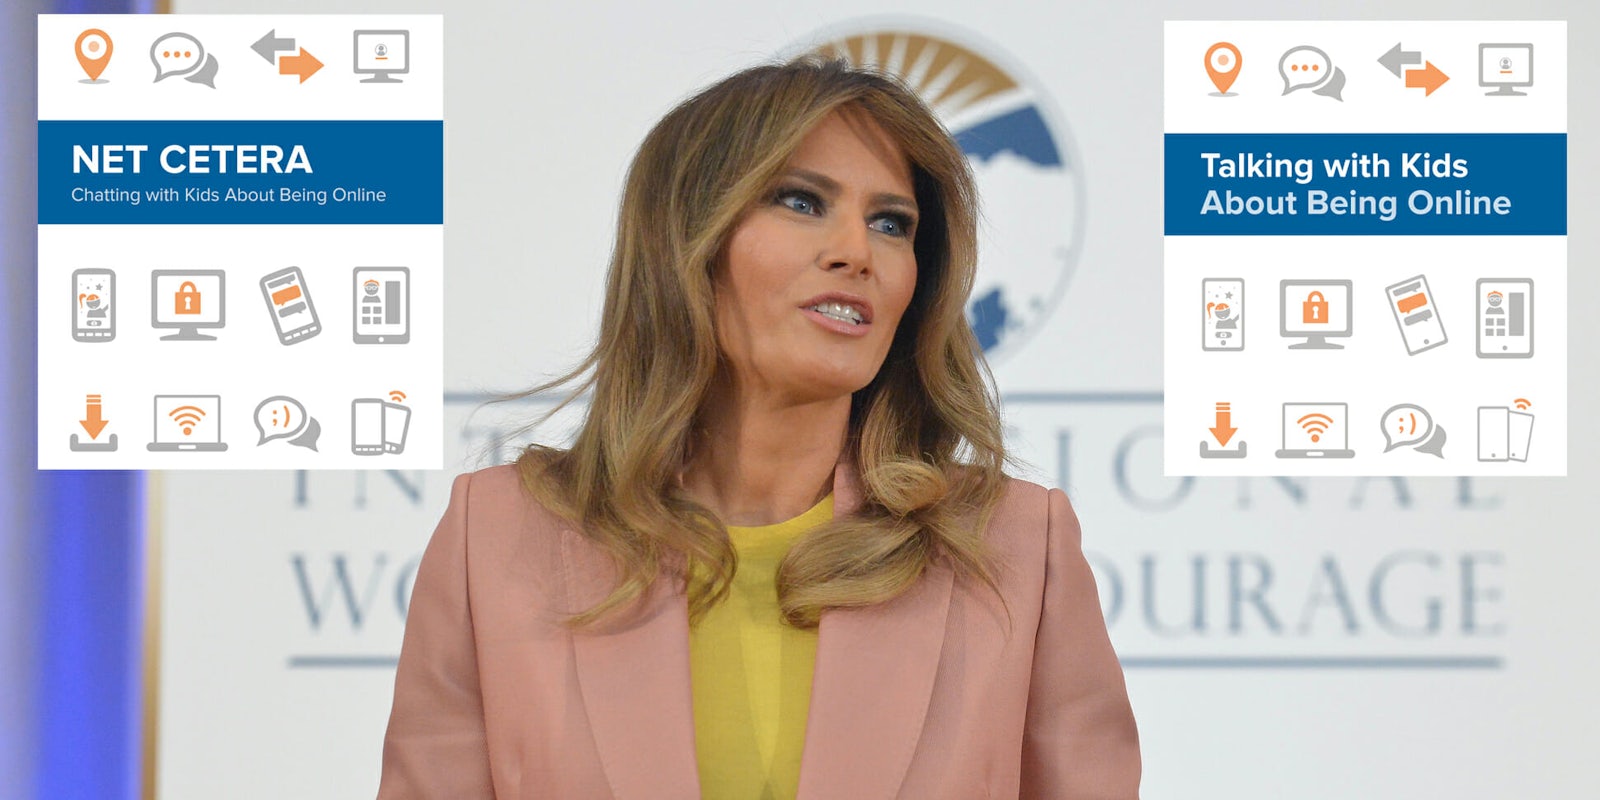 There are some similarities between Melania Trump's 'Be Best' pamphlet and one released in 2014 by the FTC.